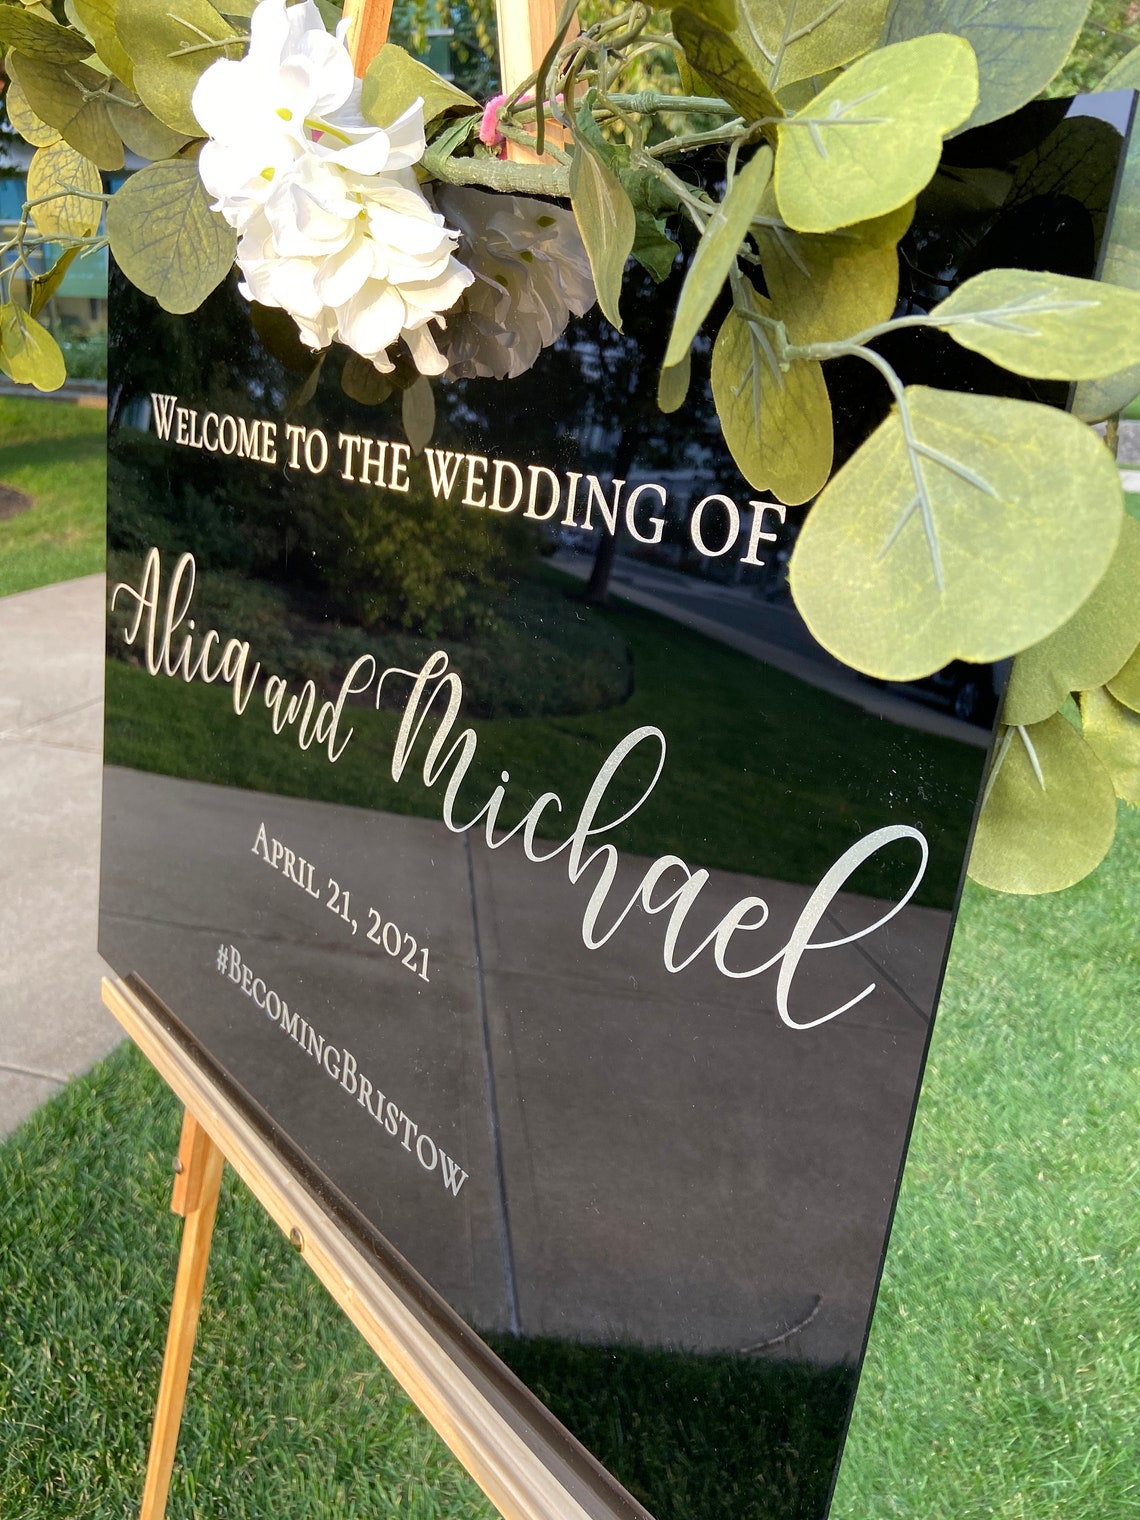 Acrylic event welcome sign. Customizable designs, fonts and dates for weddings, birthdays, bridal/baby showers, retirements or any other event you wish to celebrate. Place this sign at the entrance of your event to welcome your guests in style and simplicity. thequinnandcompany. www.thequinnandcompany.com.